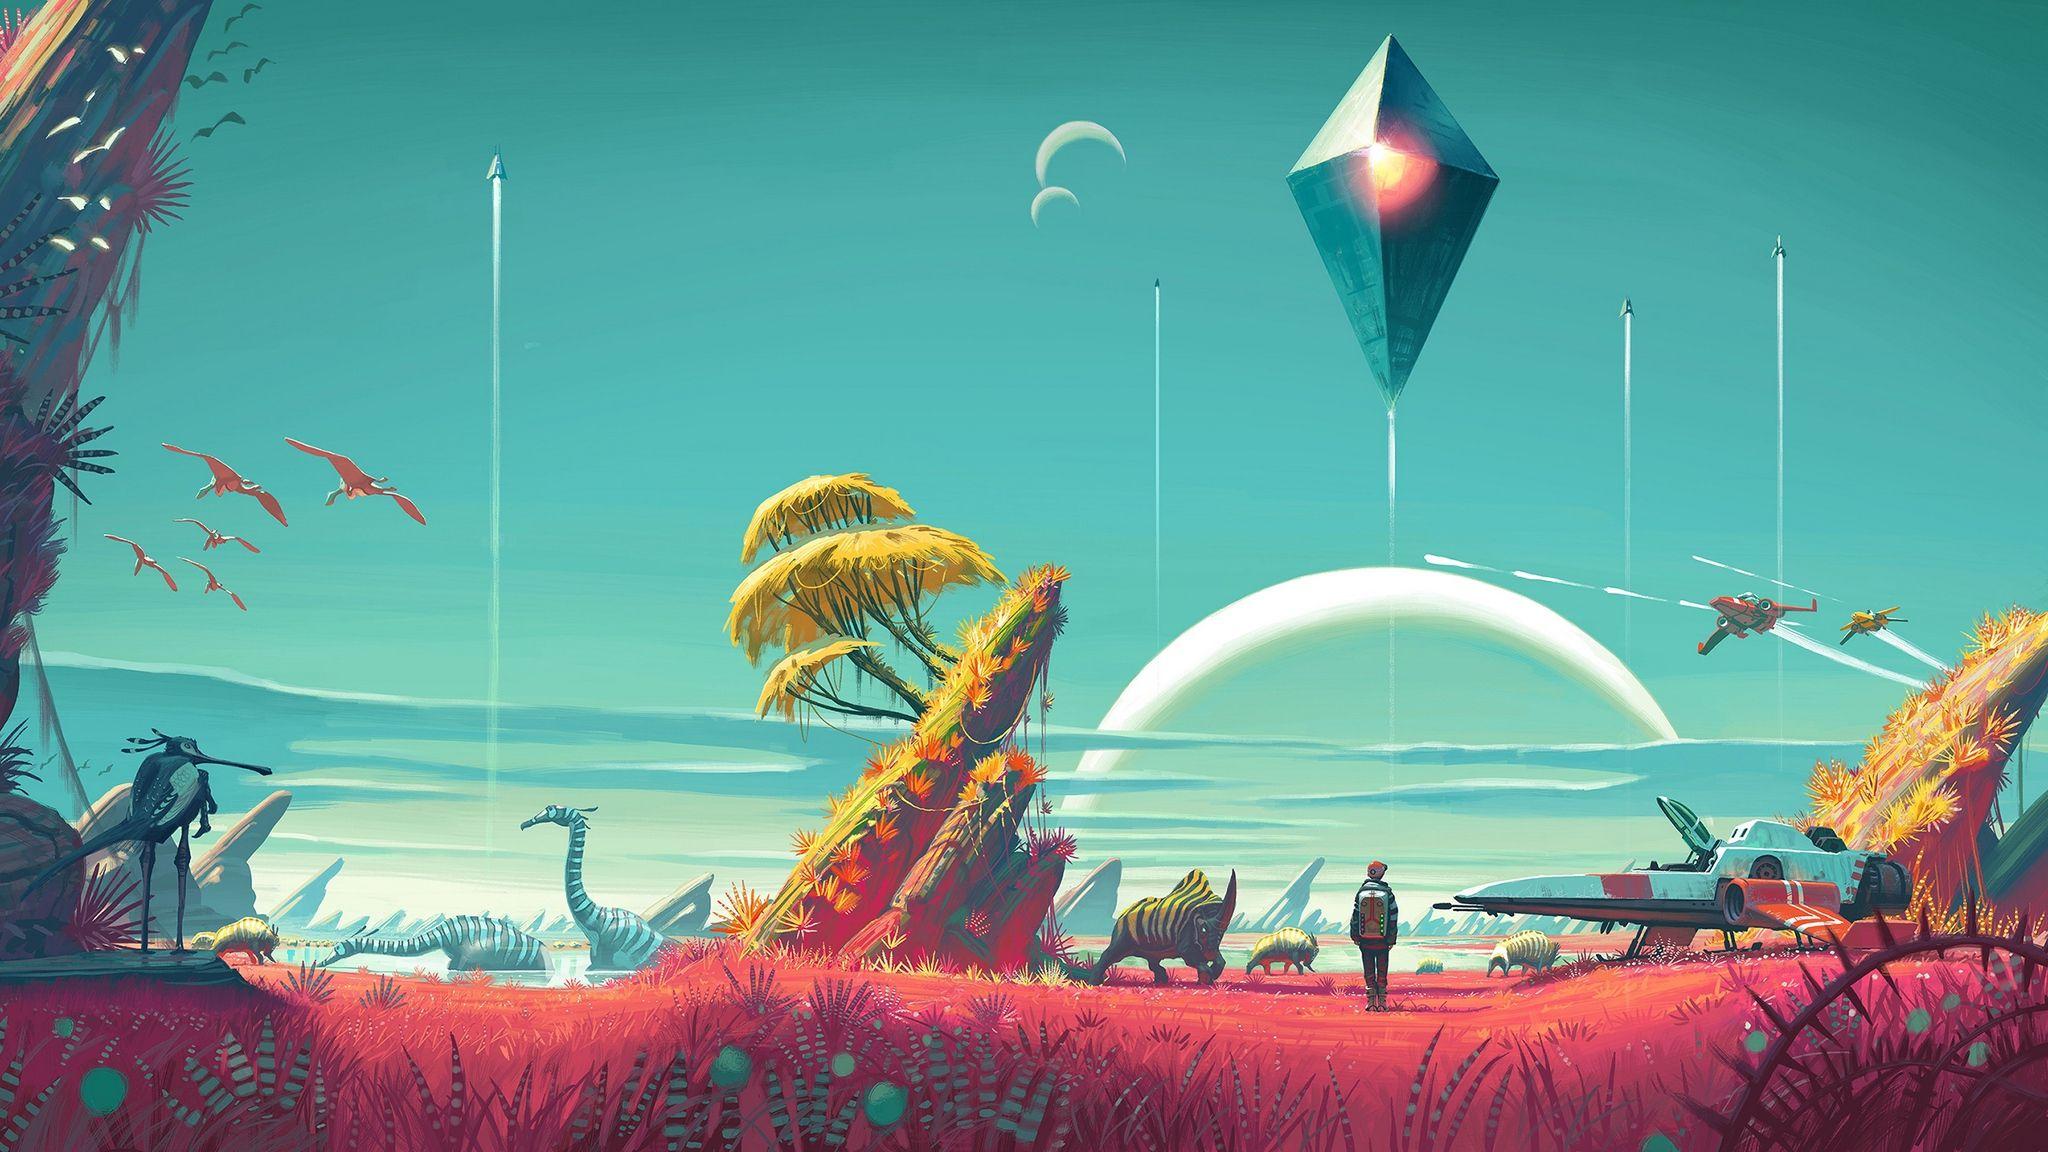 Download wallpaper 2048x1152 hello games, ps pc ultrawide monitor